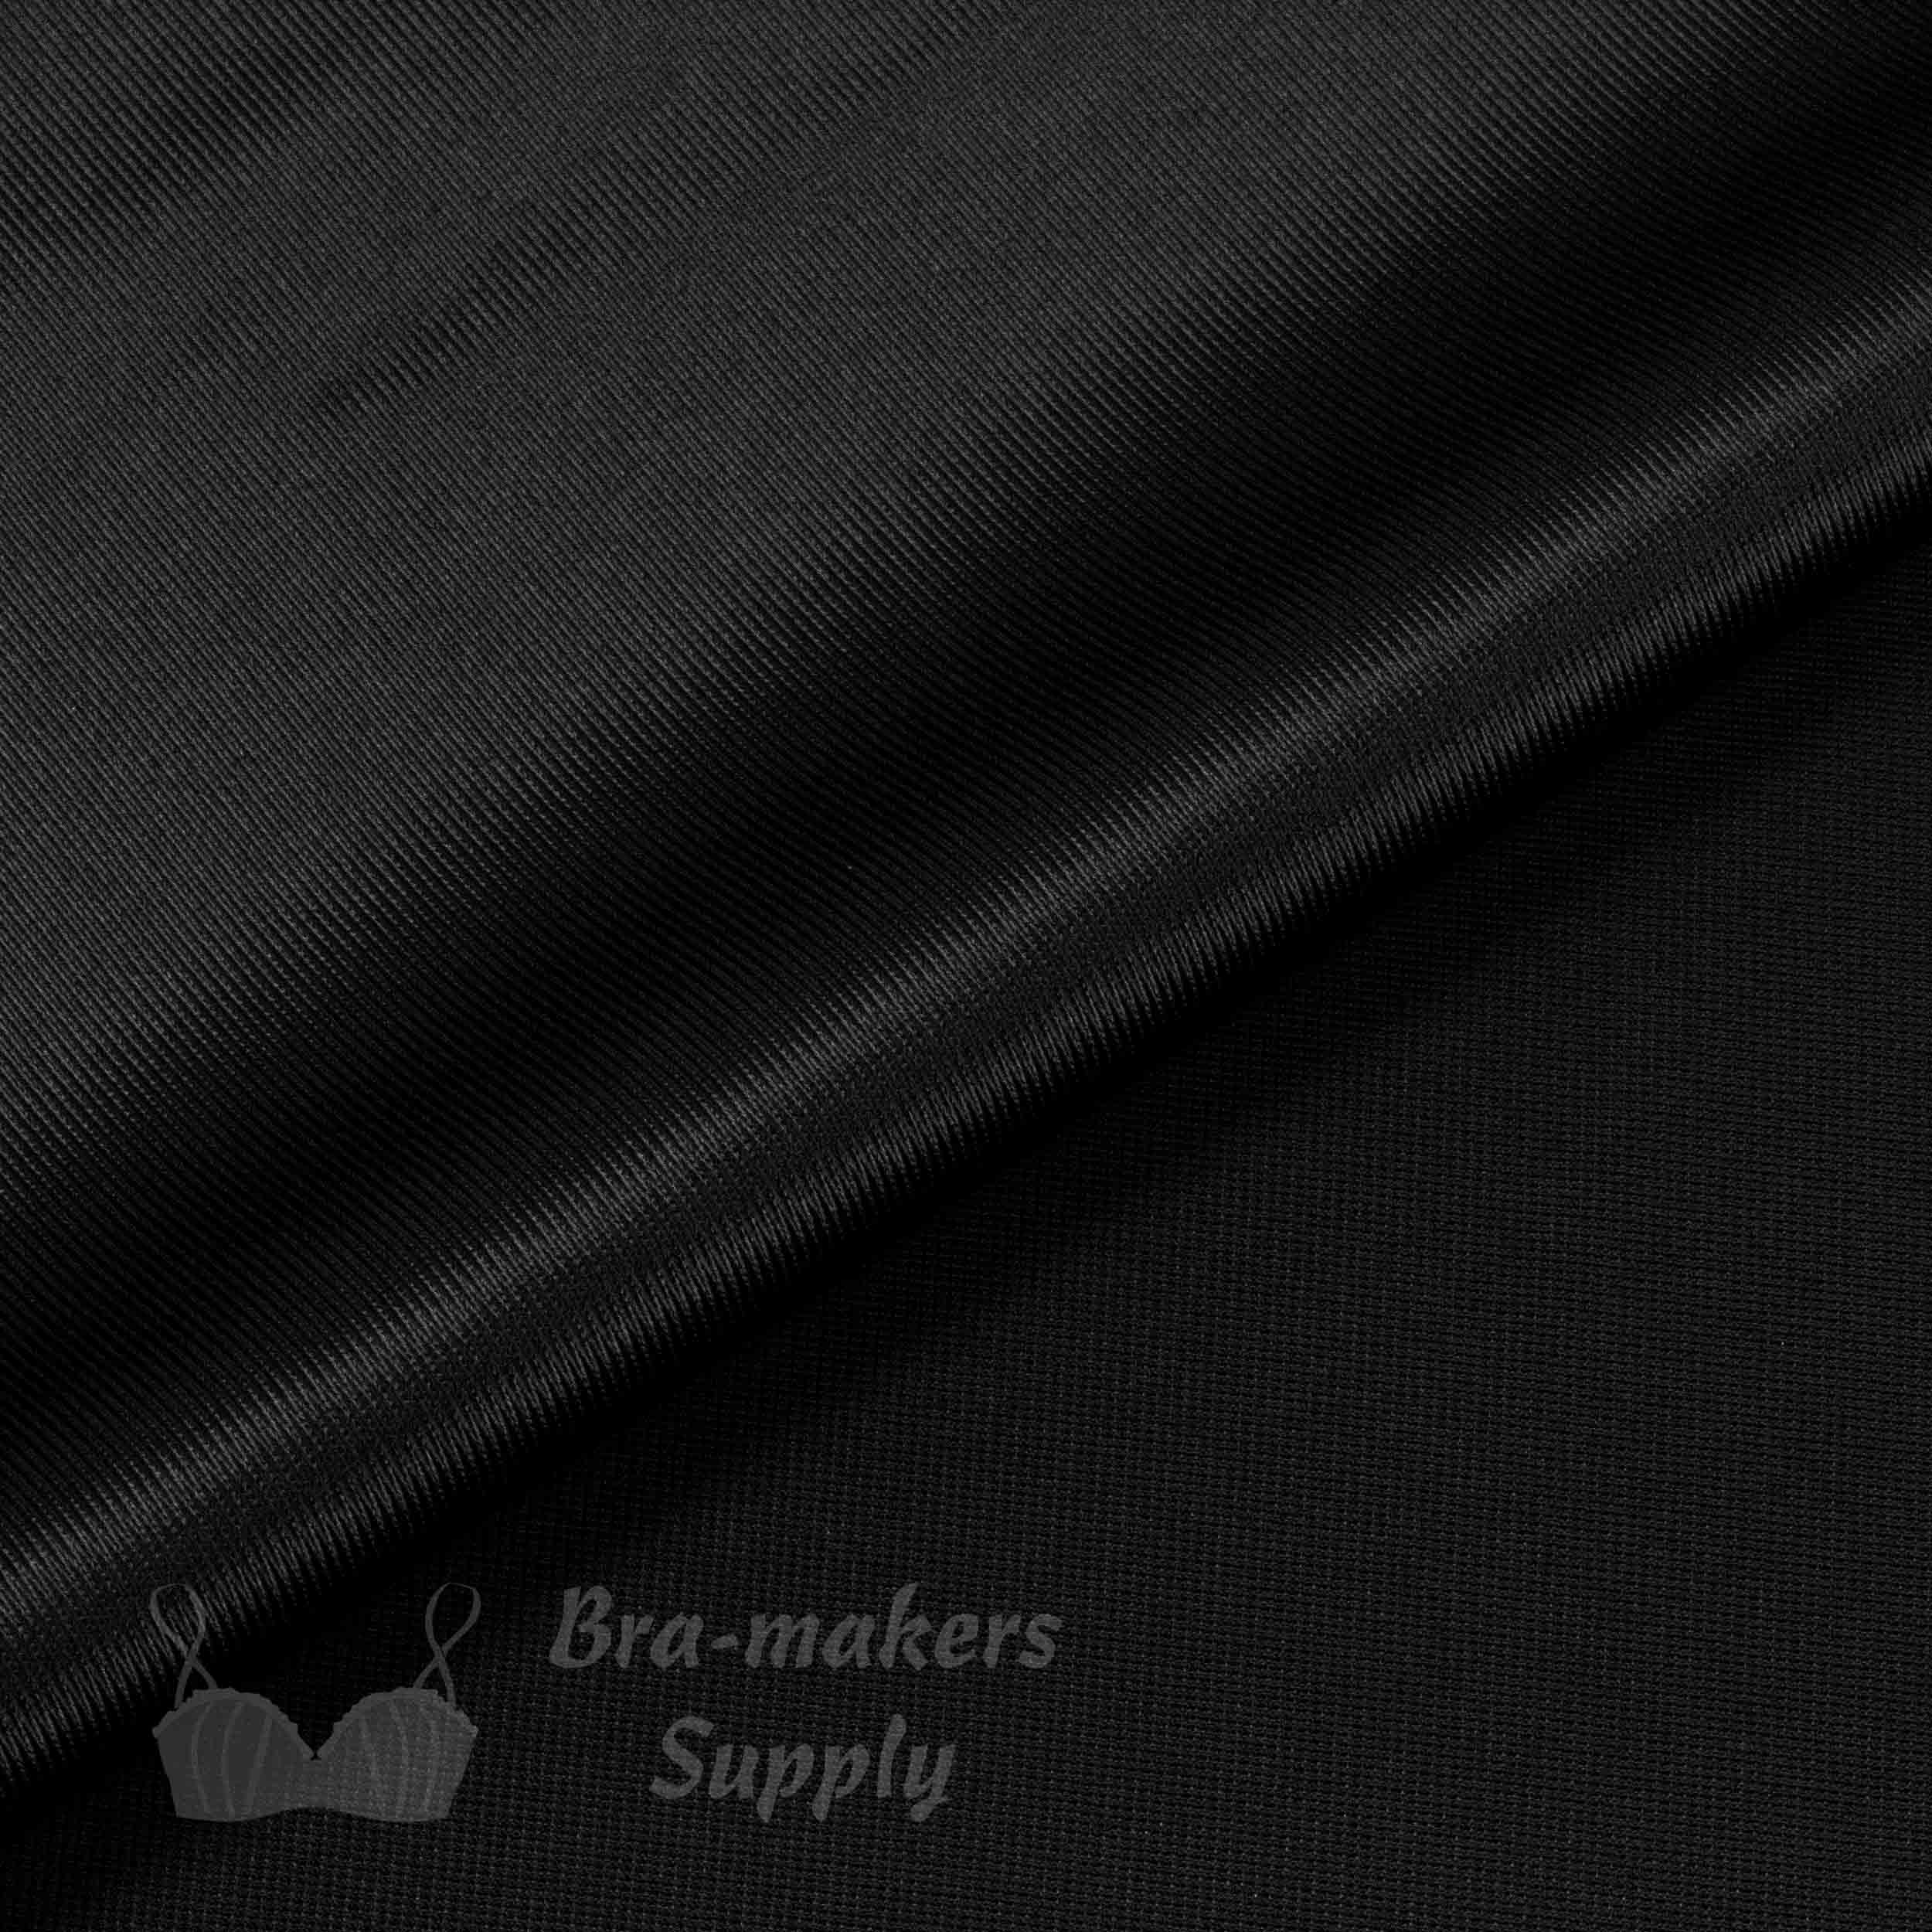 duoplex reversible low stretch bra cup fabric FJ-6 black low stretch bra cup fabric anthracite Pantone 19-4007 from Bra-Makers Supply folded